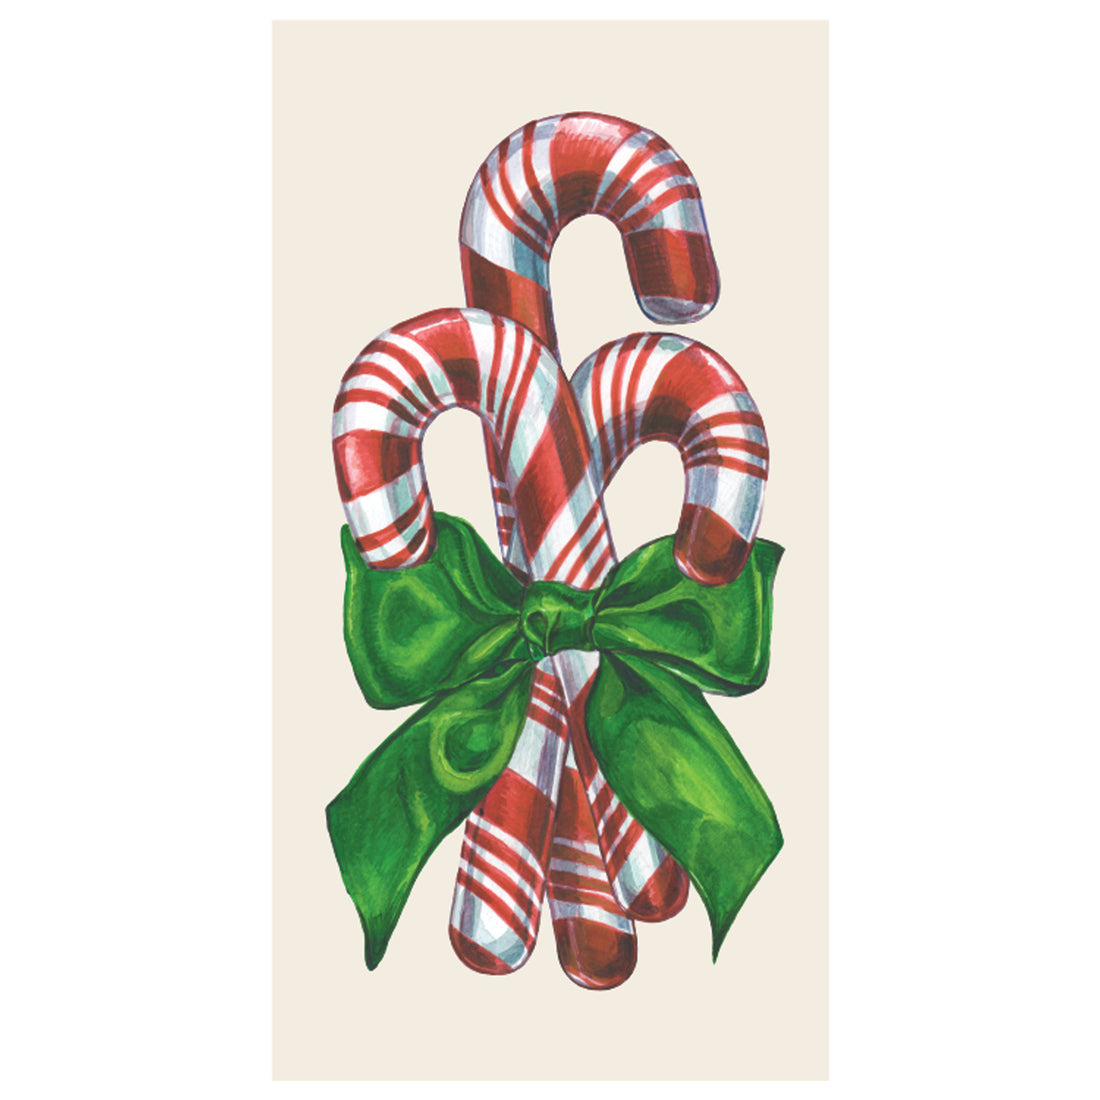 A rectangle, cream guest napkin featuring three illustrated, red and white candy canes, bundled and tied with a green ribbon.